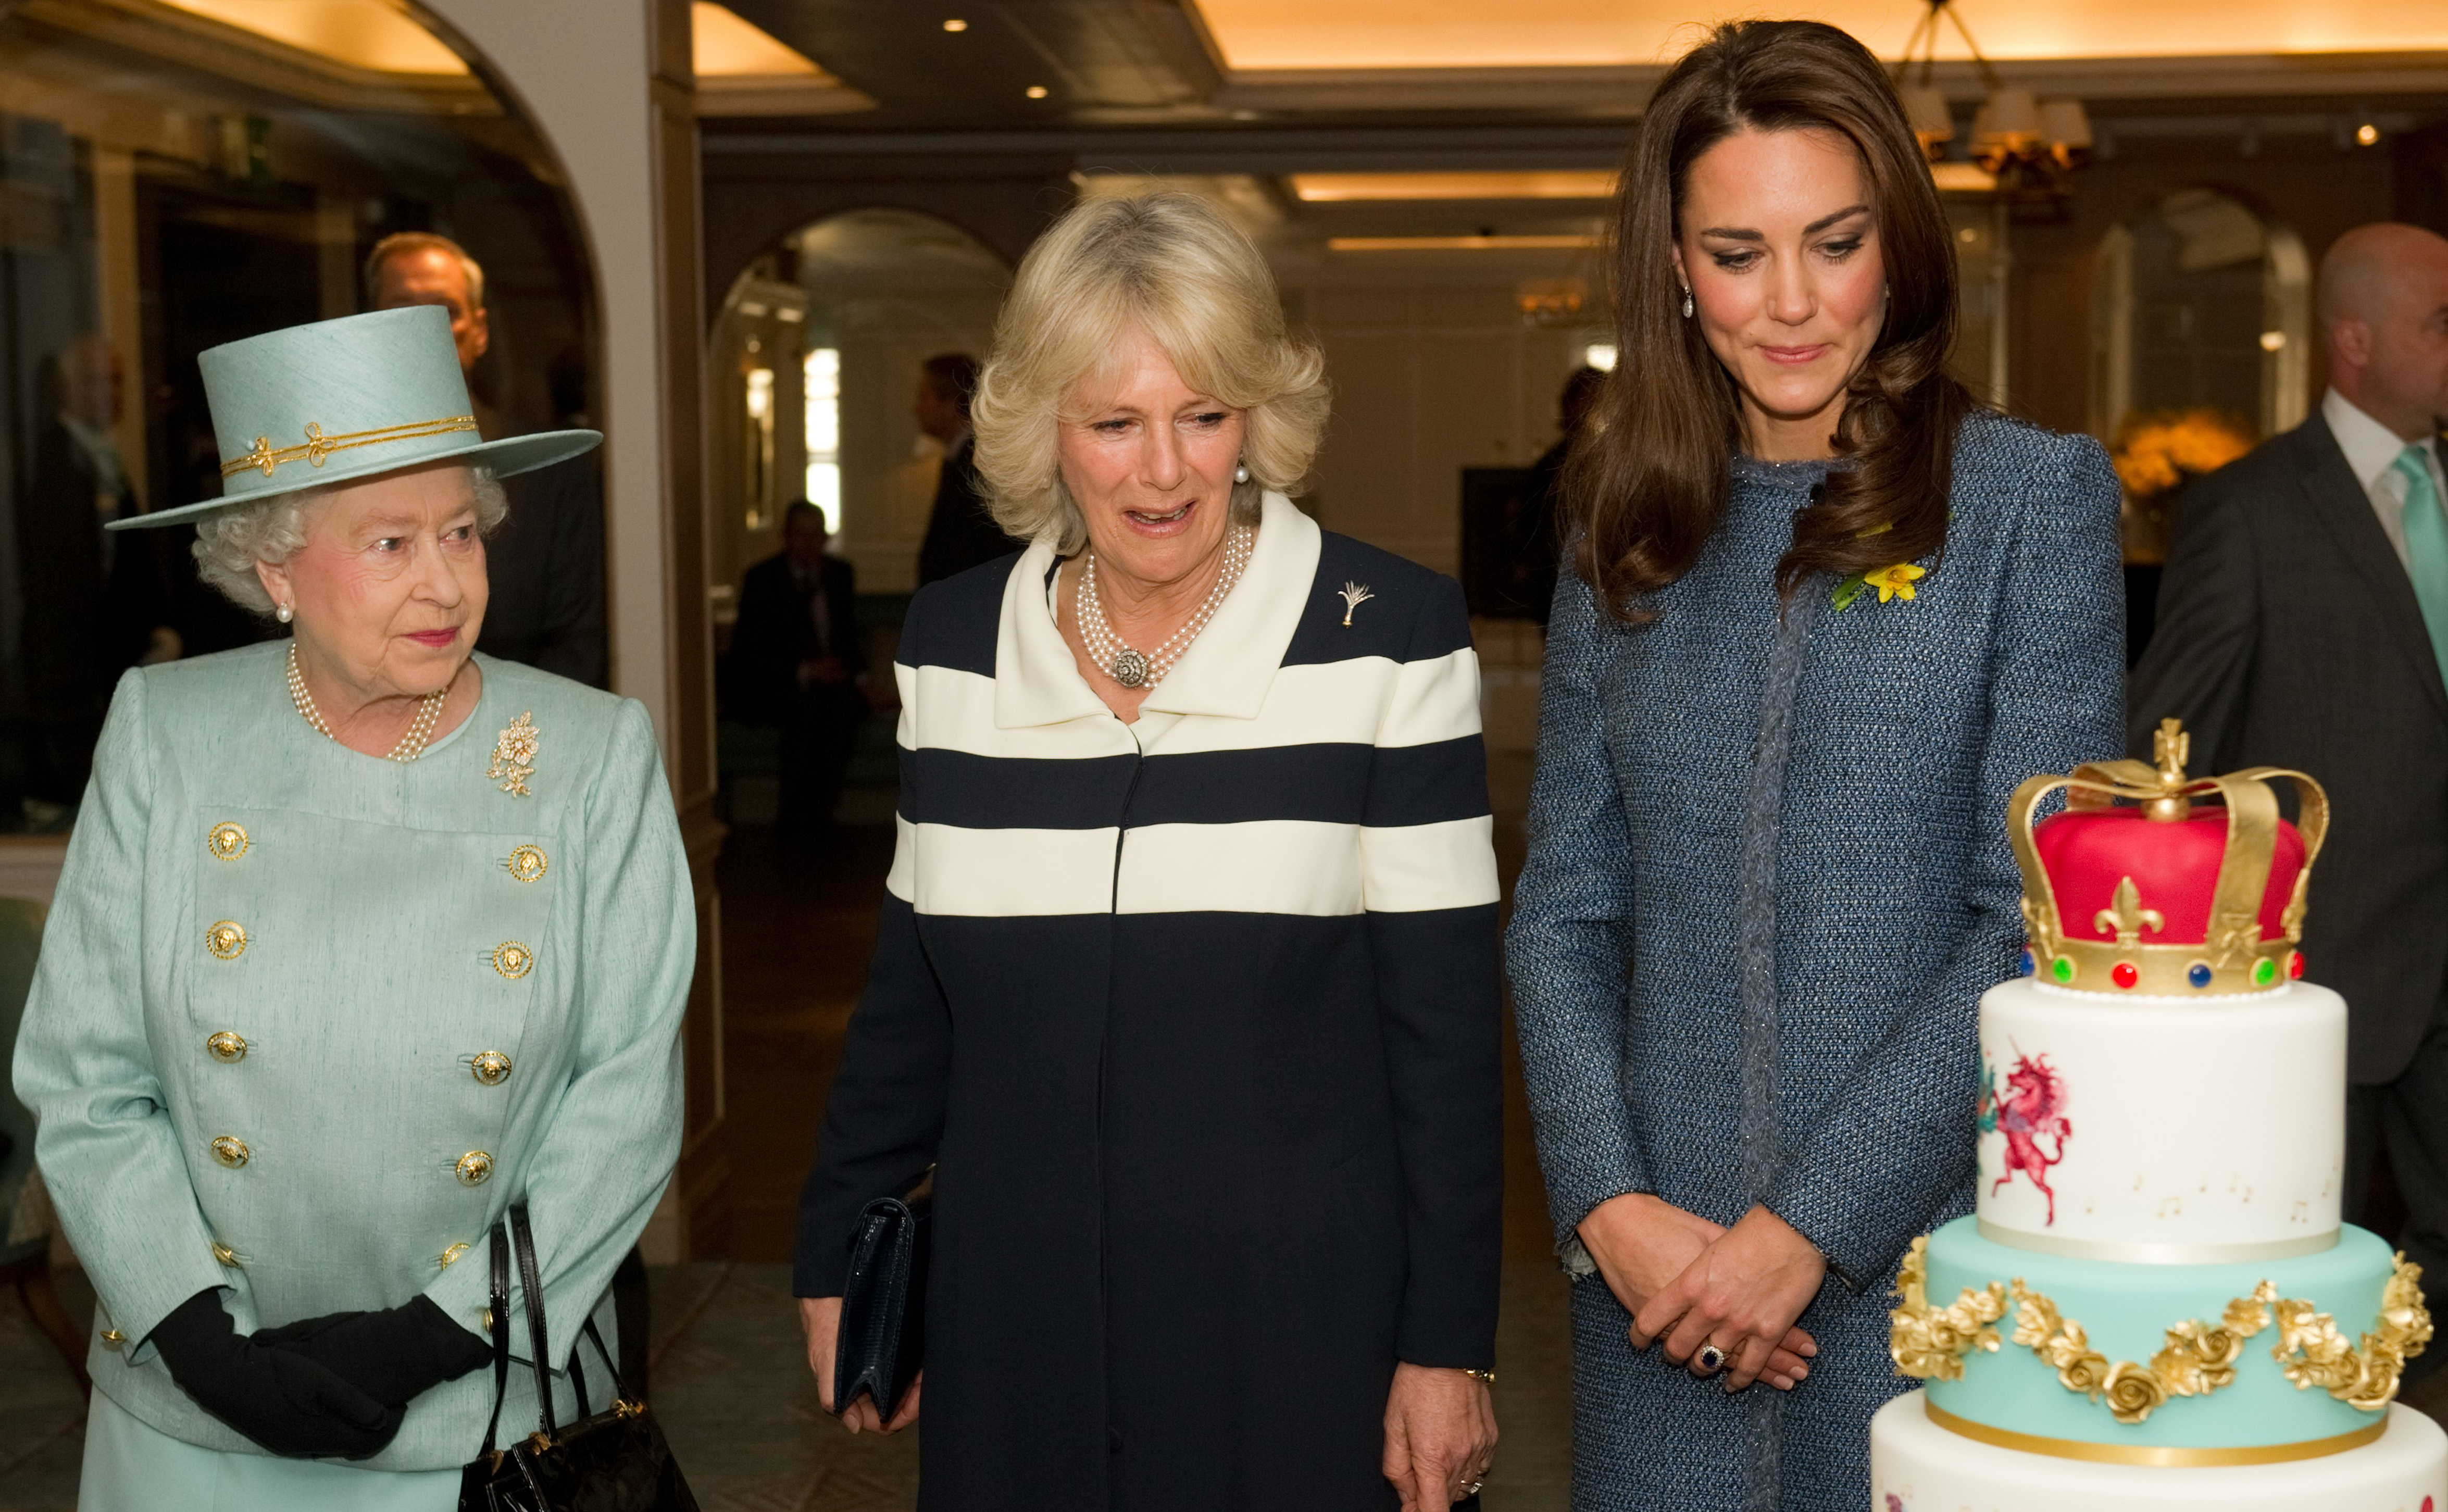 Britain's Queen Elizabeth II (L), Catherine, Duchess of Cambridge (R), and Camilla, Duchess of Cornwall (C), look at a jubilee cake during an offical vist to a department store in central London on March 1, 2012. The queen unveiled a plaque on the pavement to commemorate the refurbishment of Piccadily upon departure after touring the Fortnum and Mason store with their royal highnesses. AFP PHOTO / POOL / LEON NEAL (Photo credit should read LEON NEAL/AFP/Getty Images)